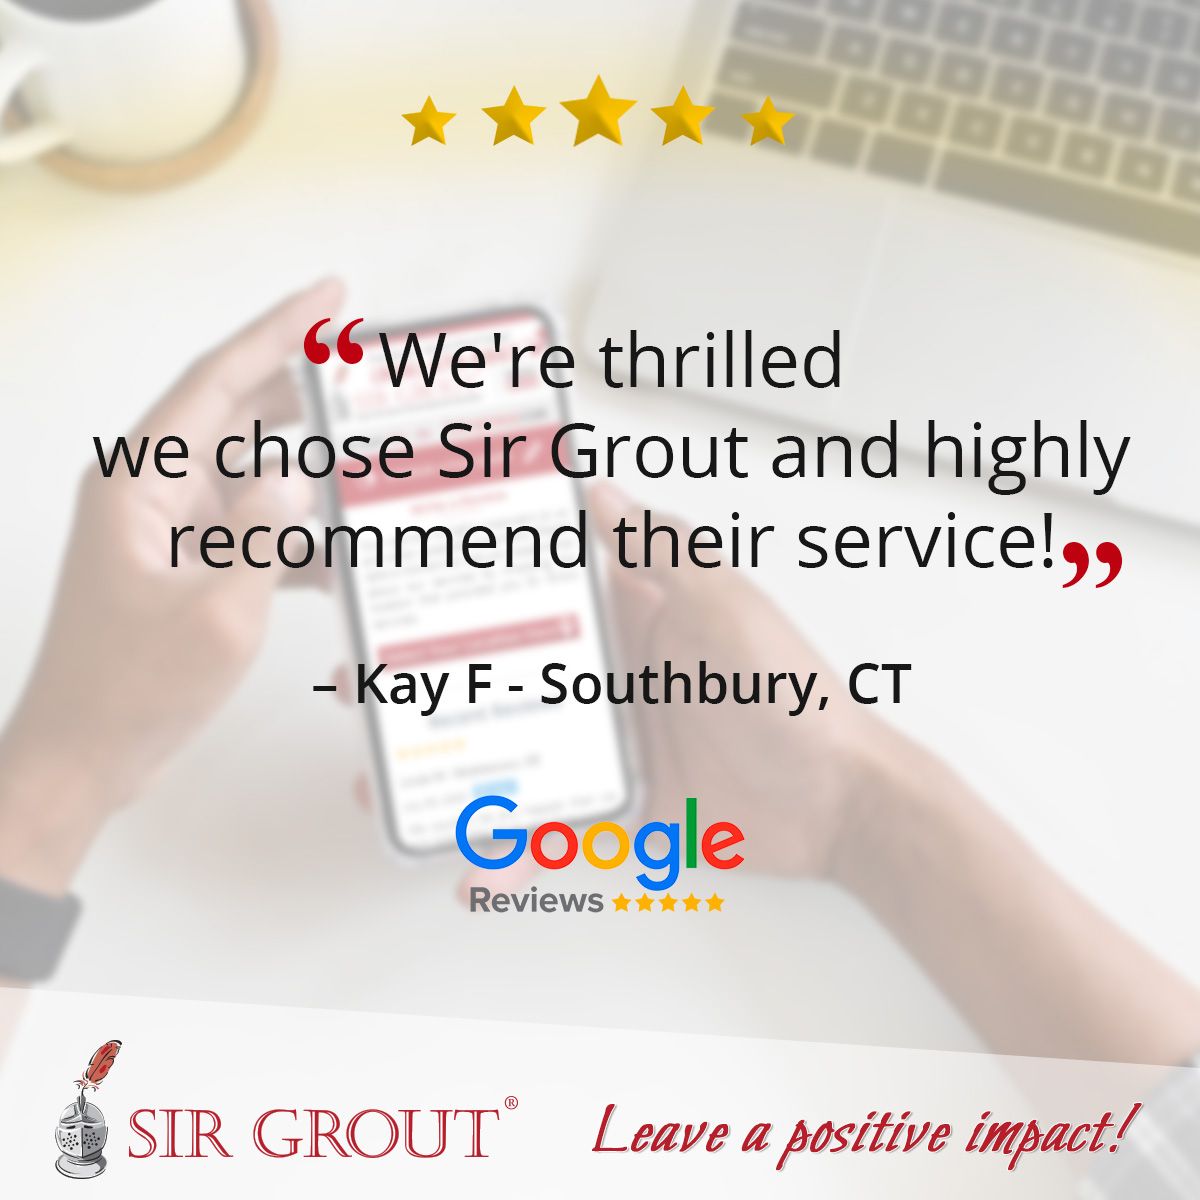 We're thrilled we chose Sir Grout and highly recommend their service!